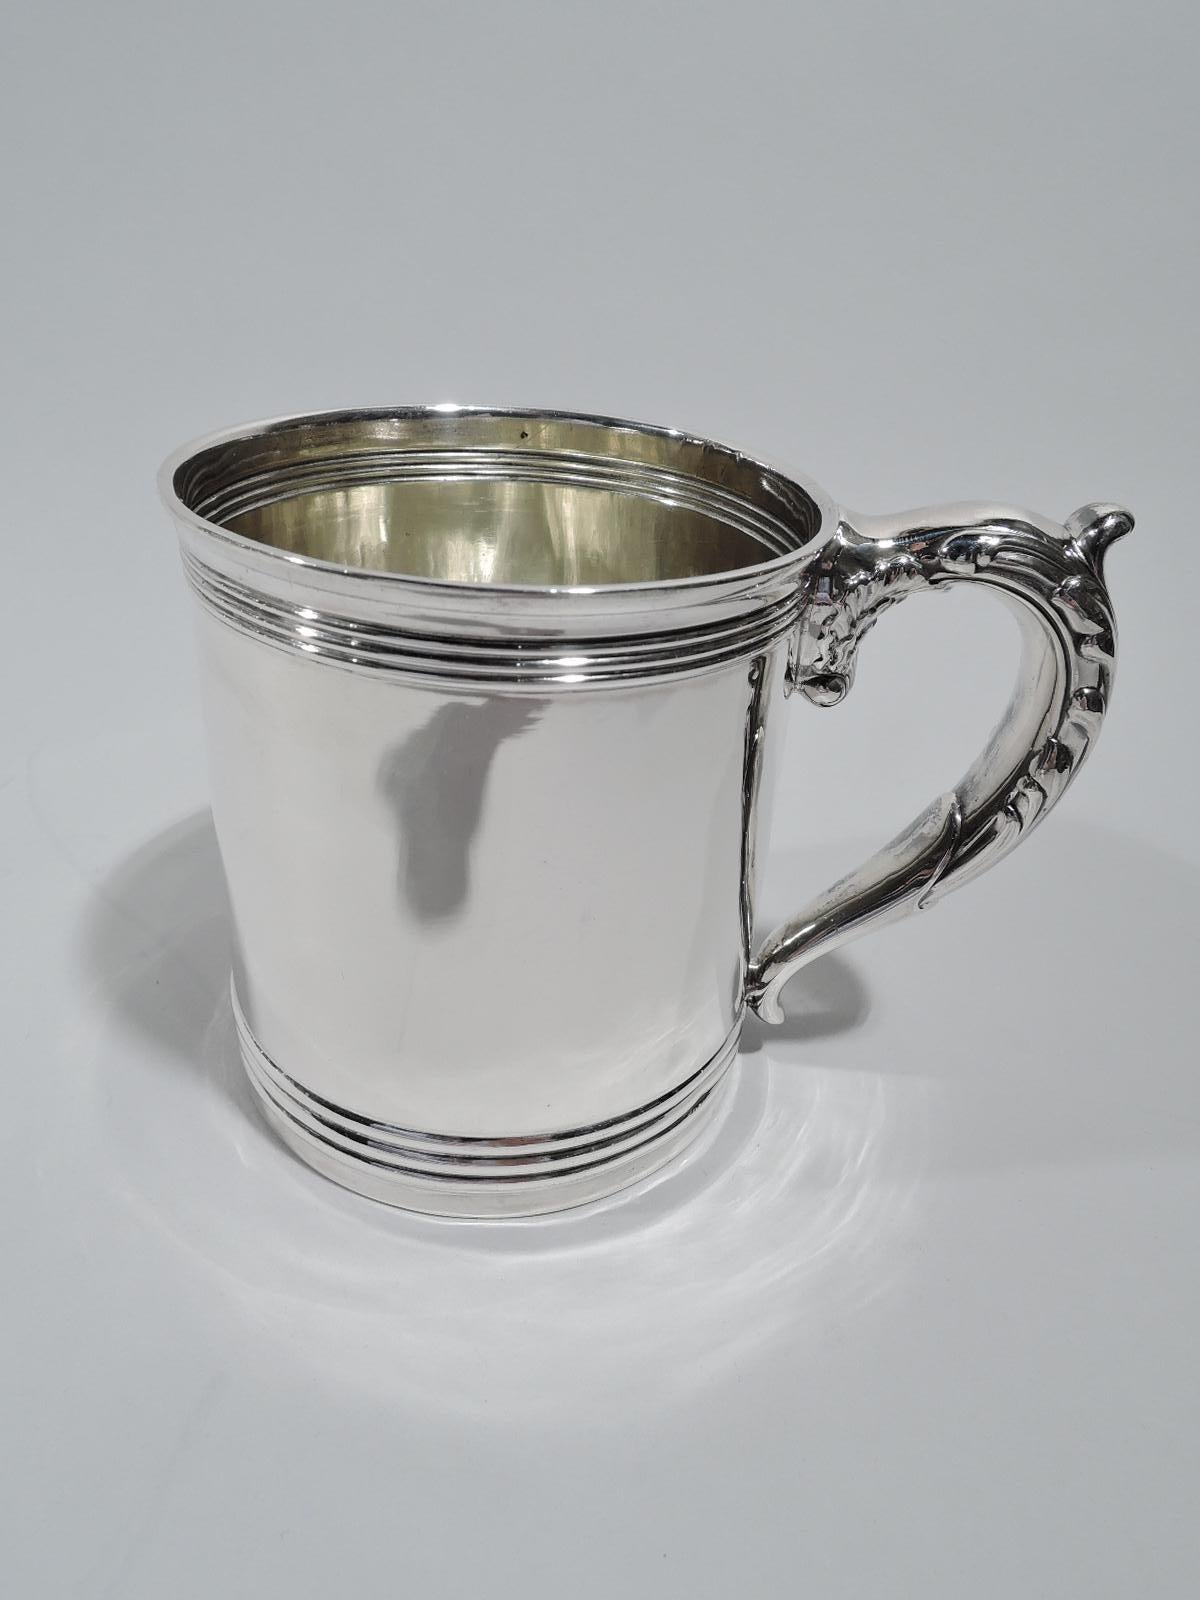 Classical sterling silver baby cup. Made by Gorham in providence in 1893. Gently upward tapering sides with ribbed bands at top and bottom. Leaf-capped and shell-mounted scroll handle. Fully marked including maker’s stamp, date symbol, and no. 4718.